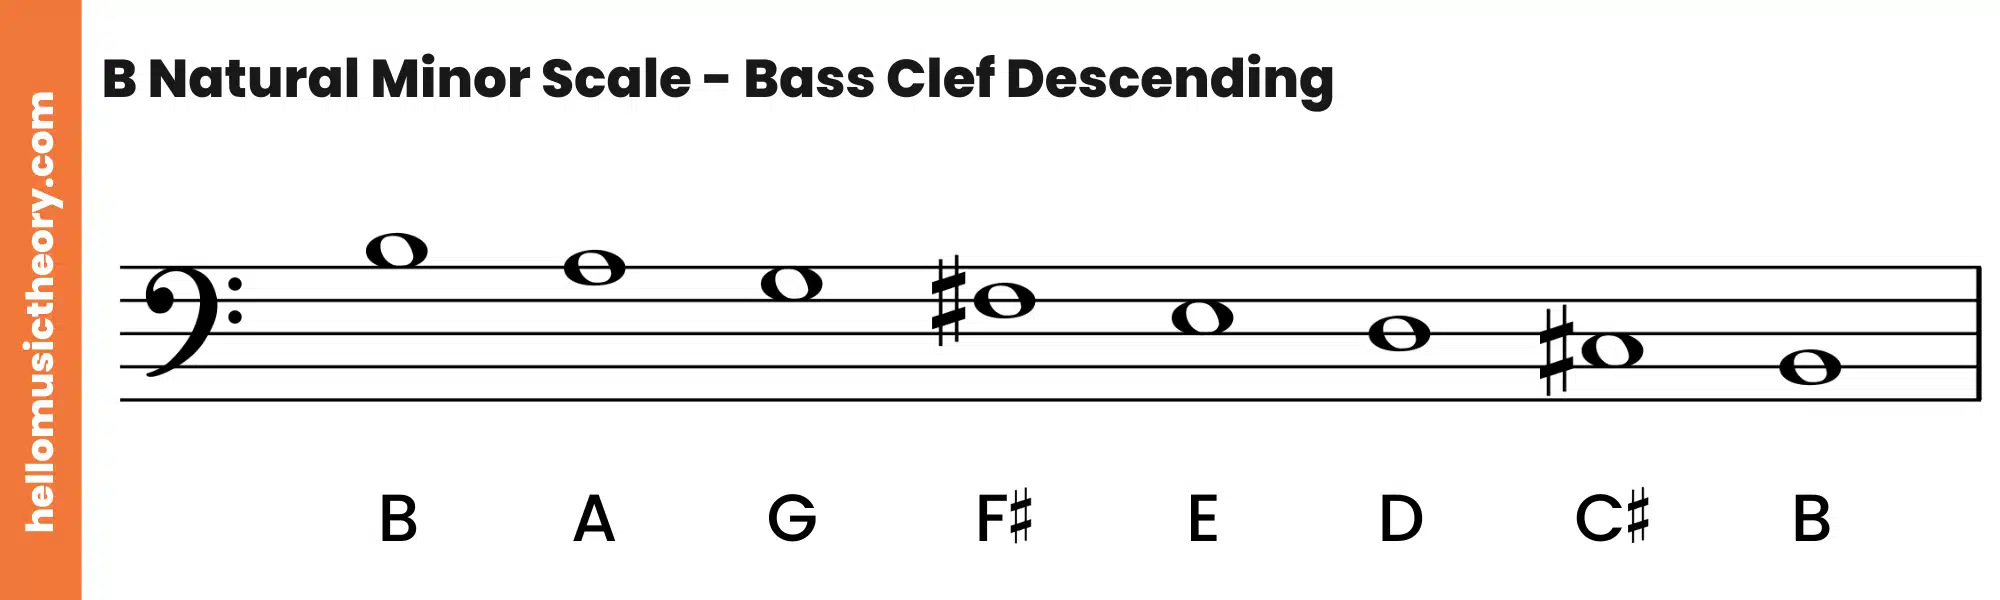 B Natural Minor Scale Bass Clef Descending